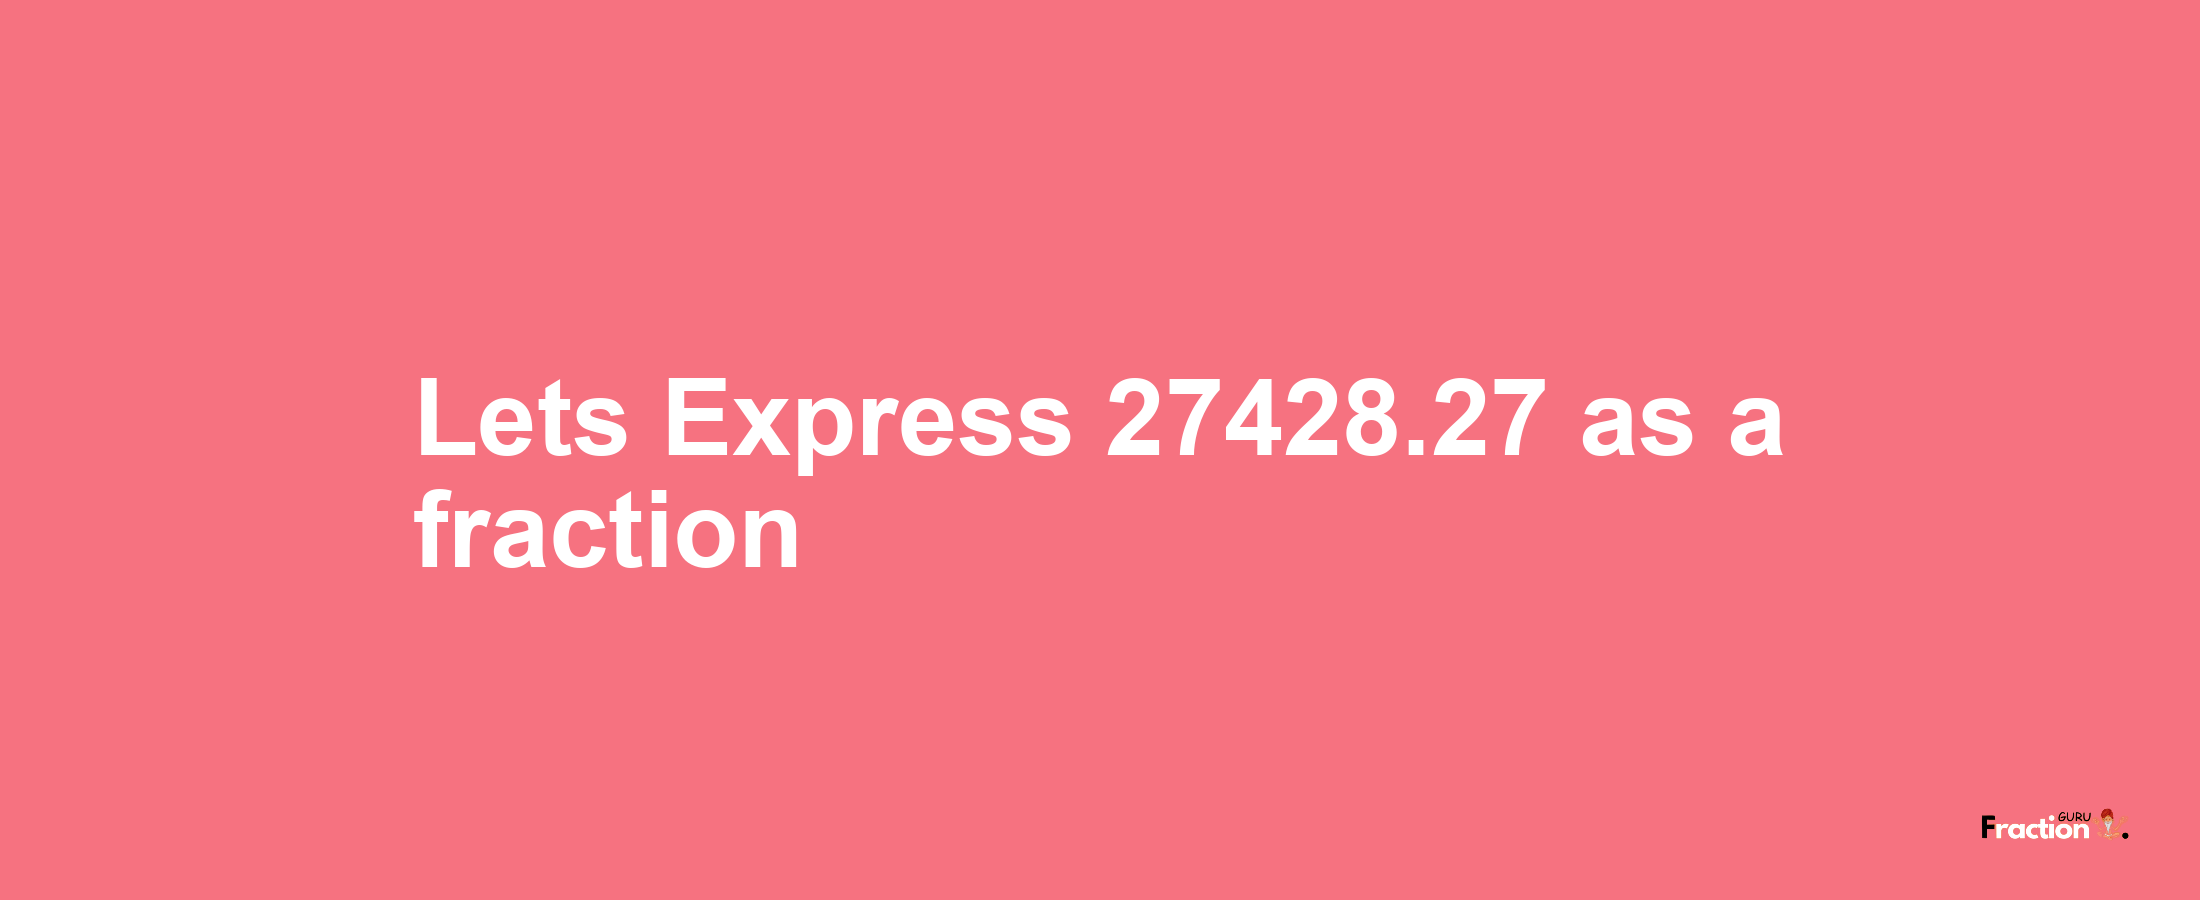 Lets Express 27428.27 as afraction